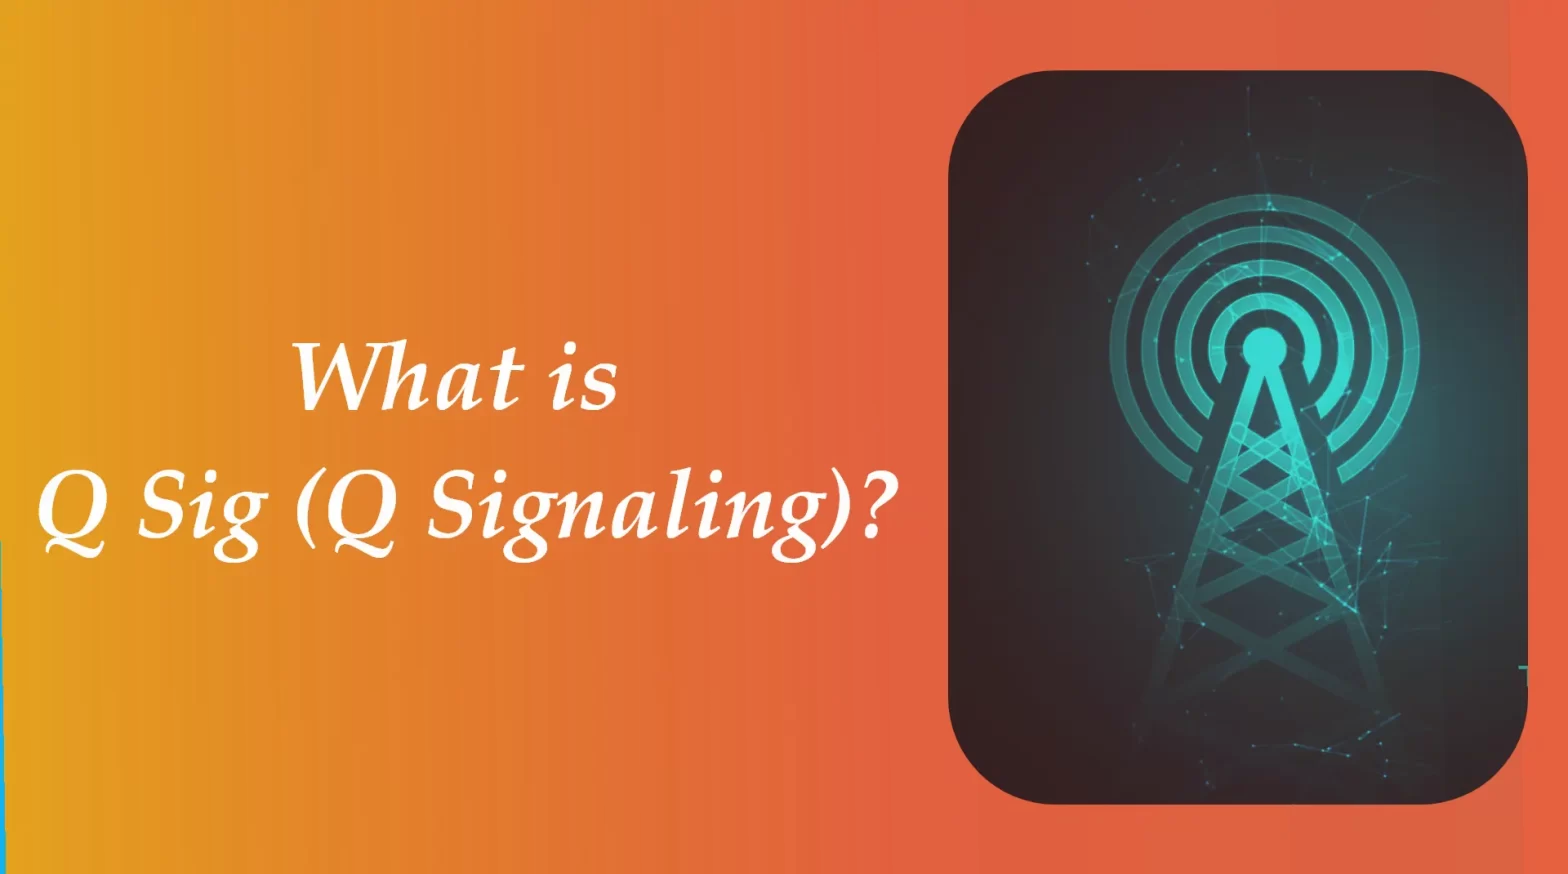 What is Q Sig (Signaling)